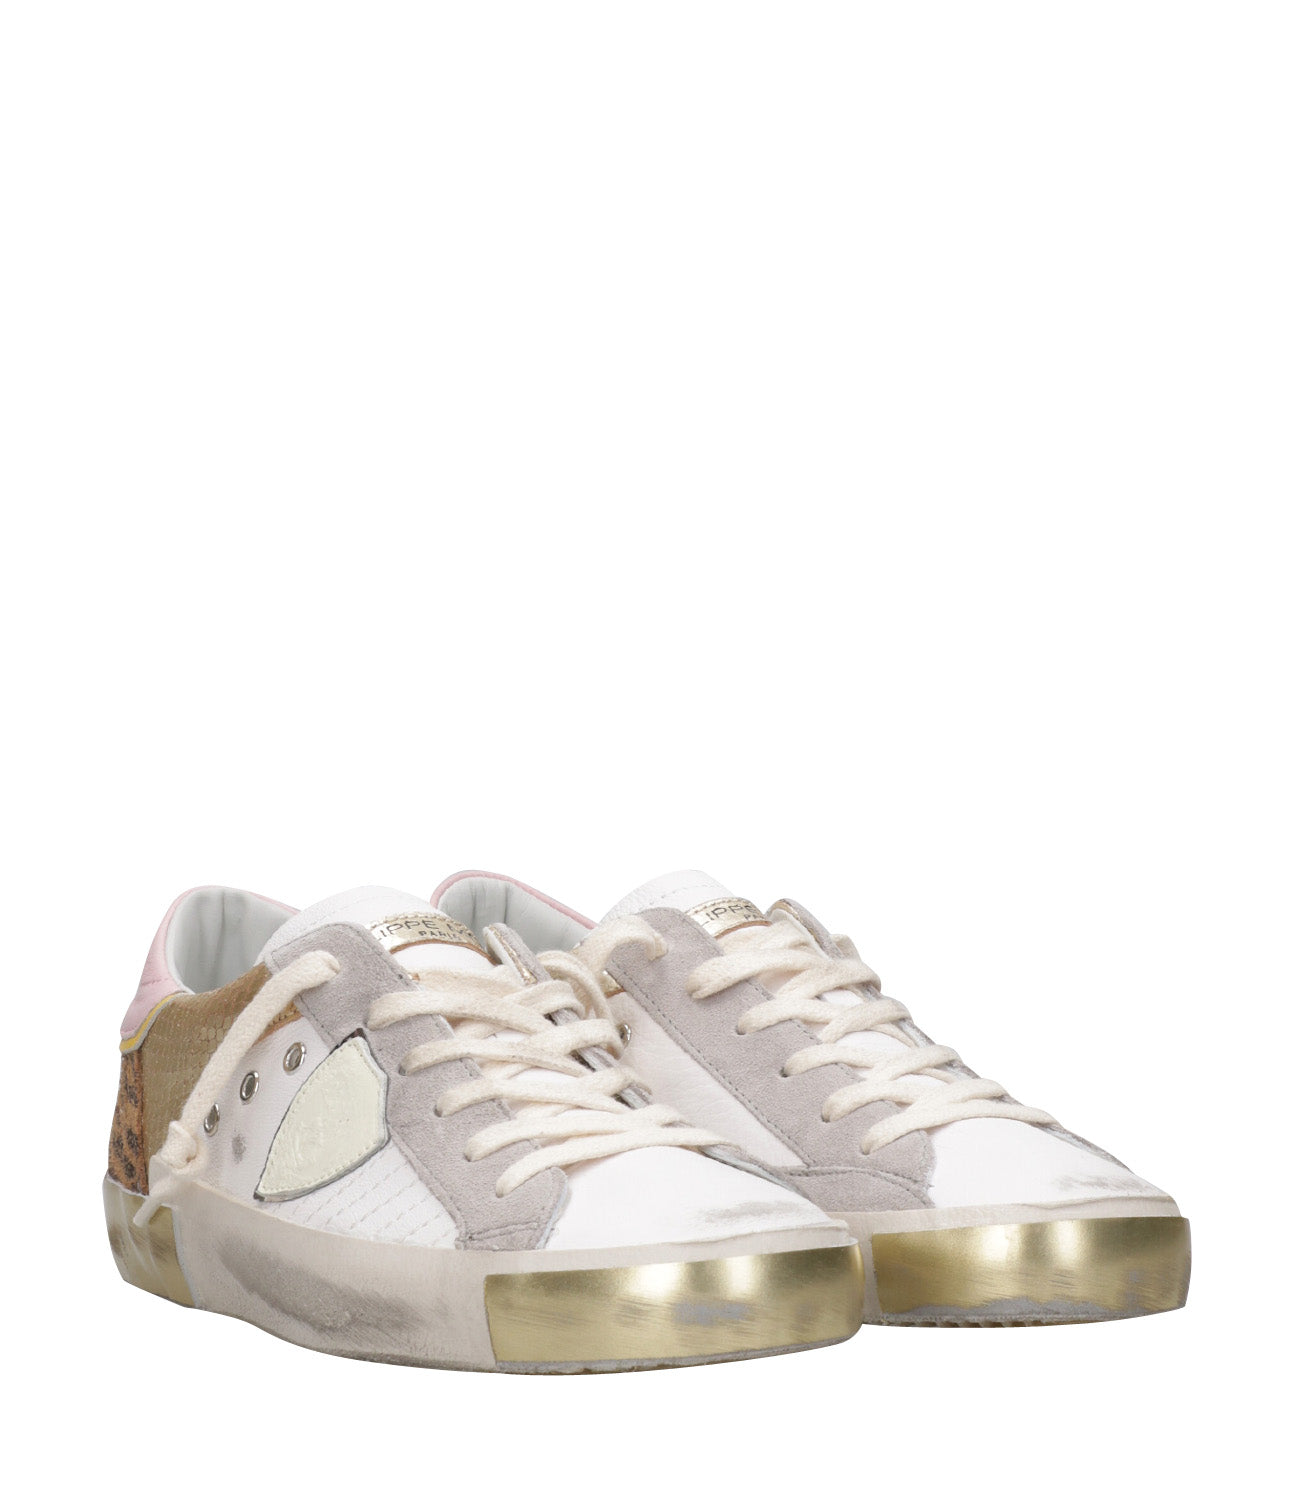 Philippe Model | Sneakers Prsx Low Woman White, Beige and Pink